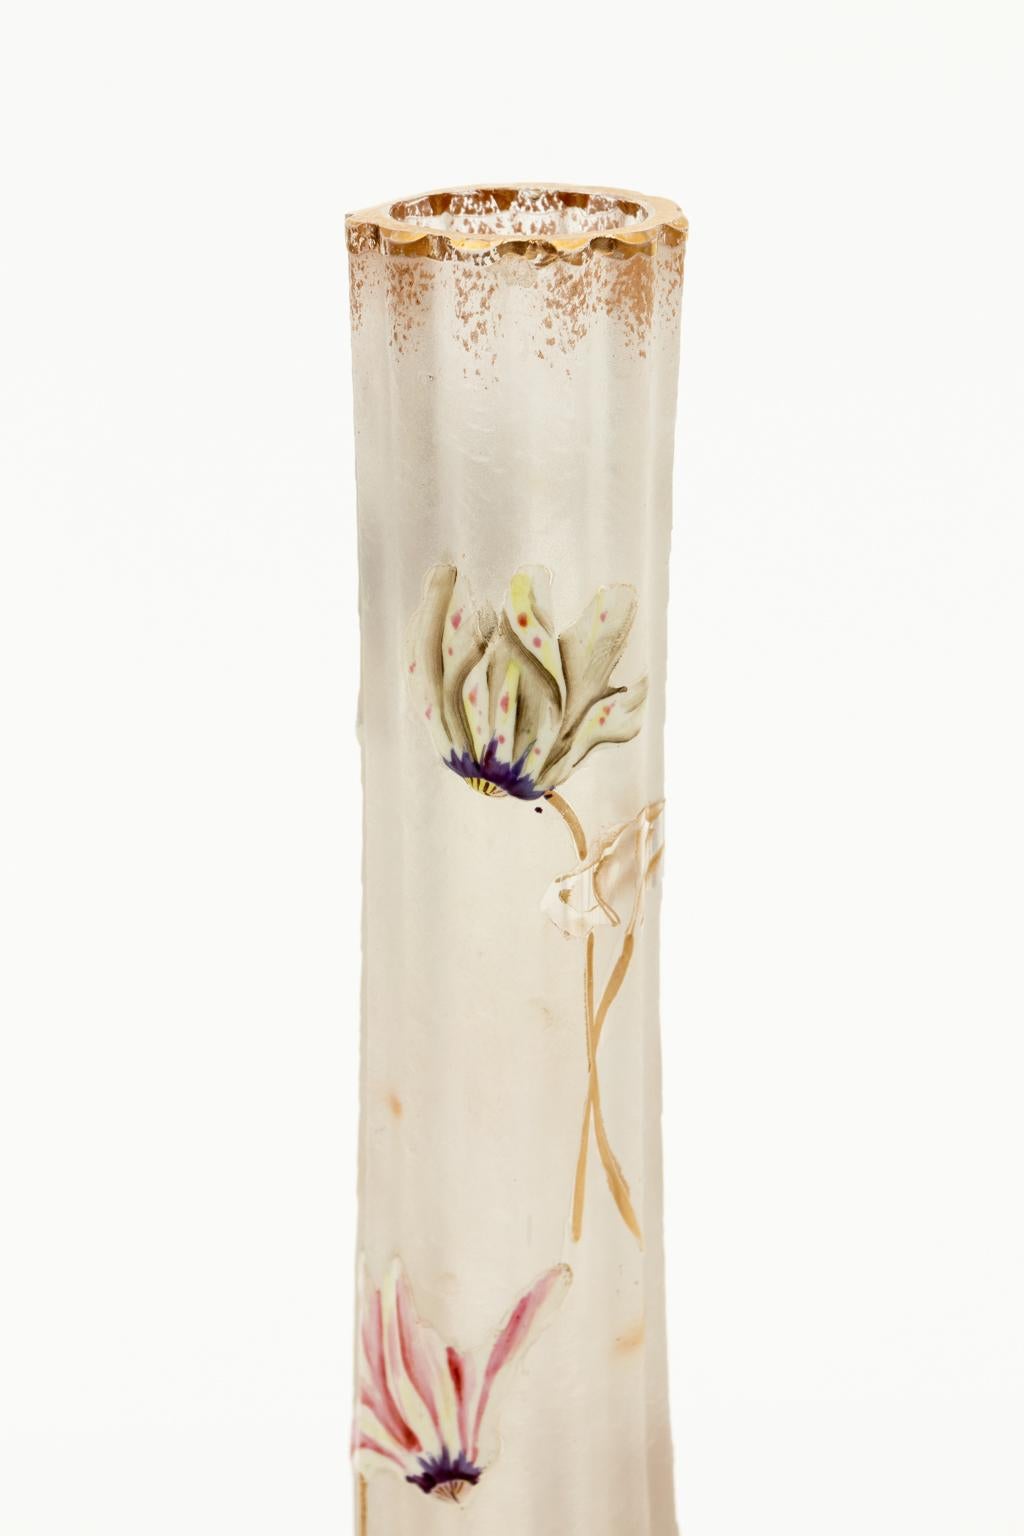 Circa 1900s Mont Joye Art Nouveau style vase. Enameled flowers on frosted crystal body. Muck gold highlights. Bulbus base. Made in France. Please note of wear consistent with age.